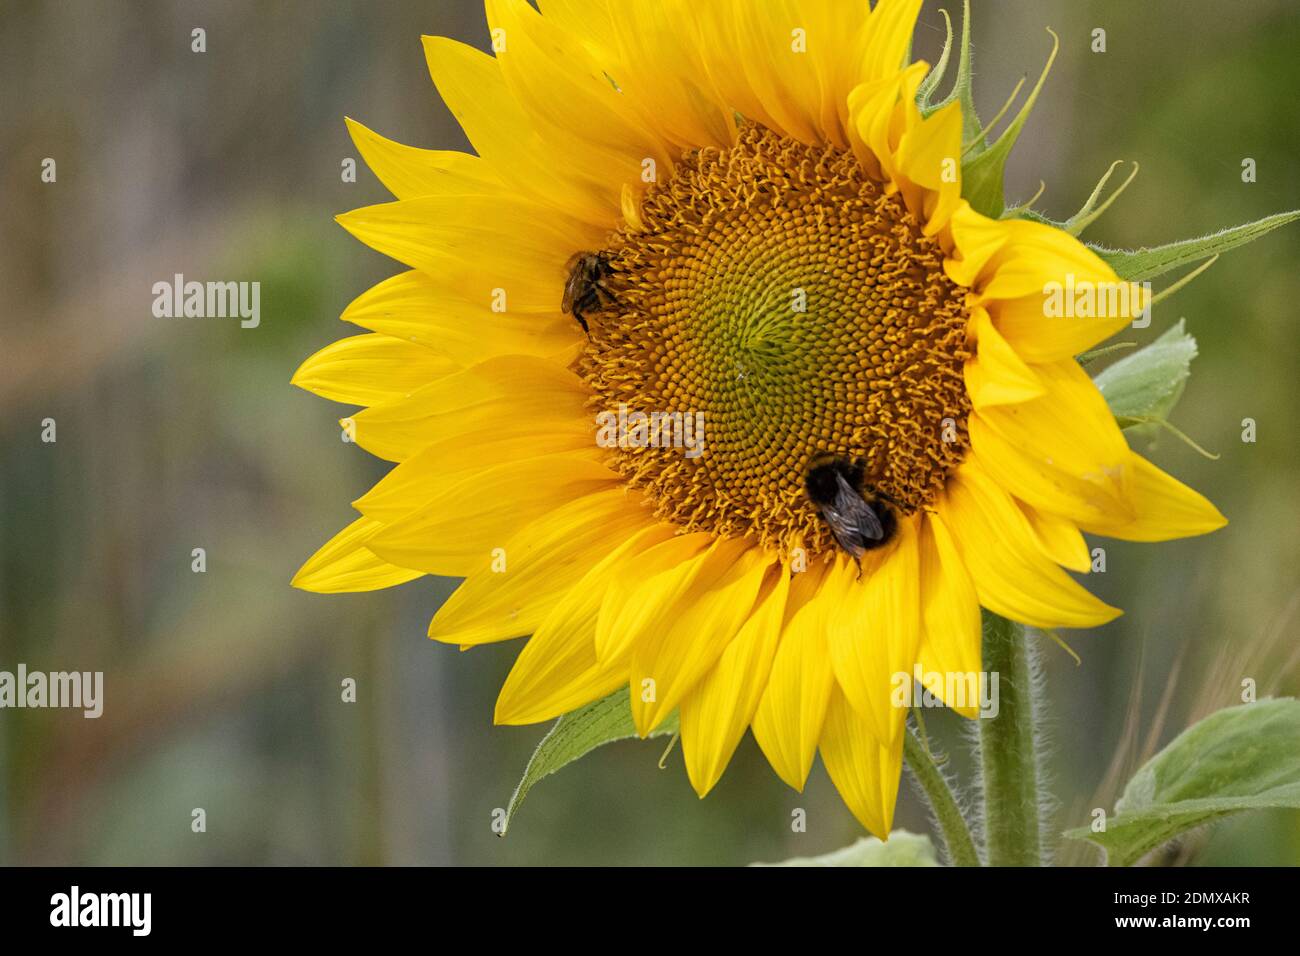 Smiling sunflower head in a cornfield, with bees for eyes. Stock Photo